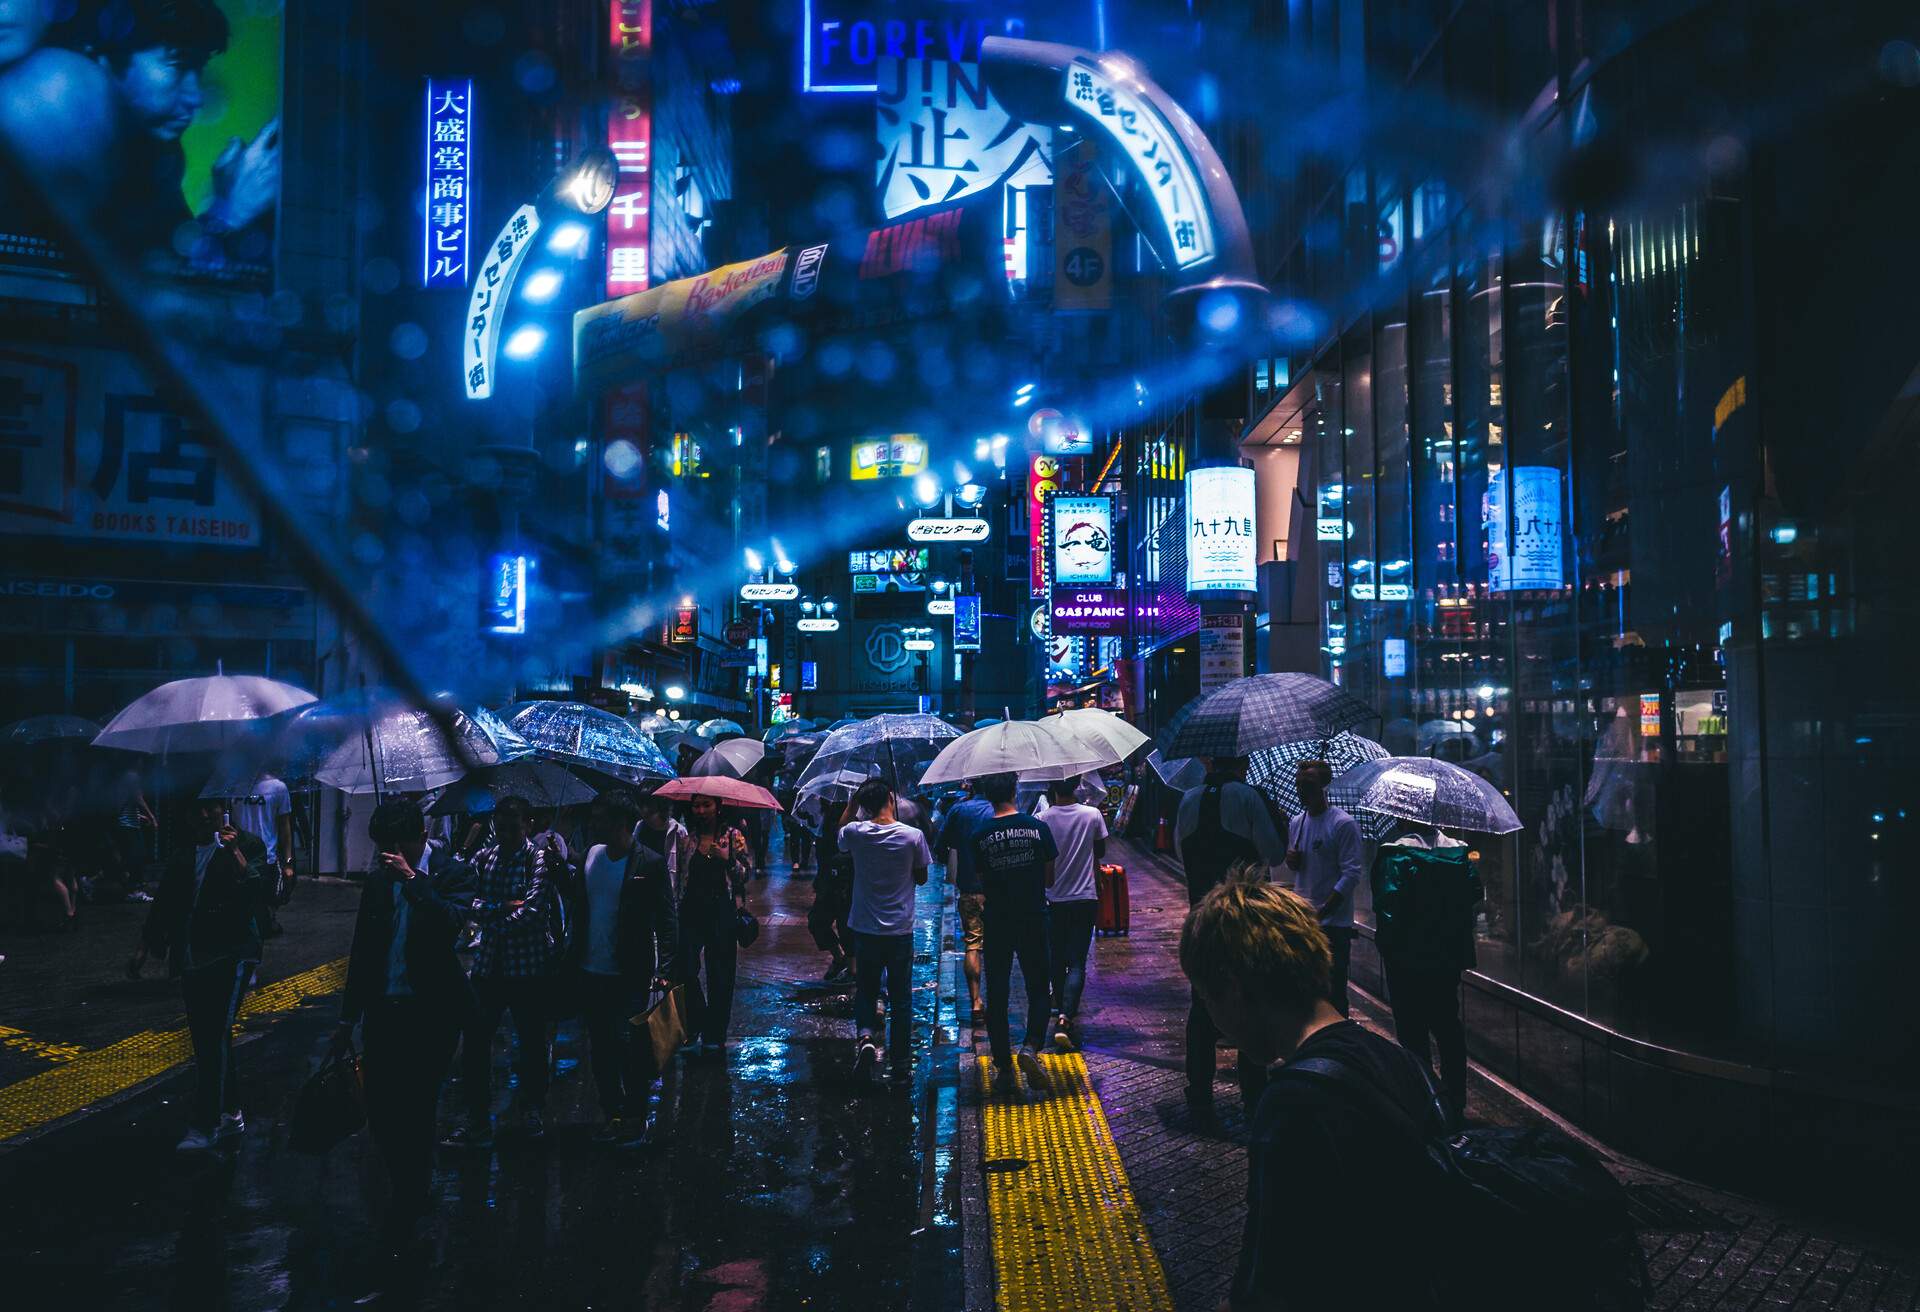 Amidst a rain-soaked night, people scurry along the streets, clutching umbrellas, as the brightly-lit signs and advertisements of the cityscape shimmer and reflect in the wet pavement.